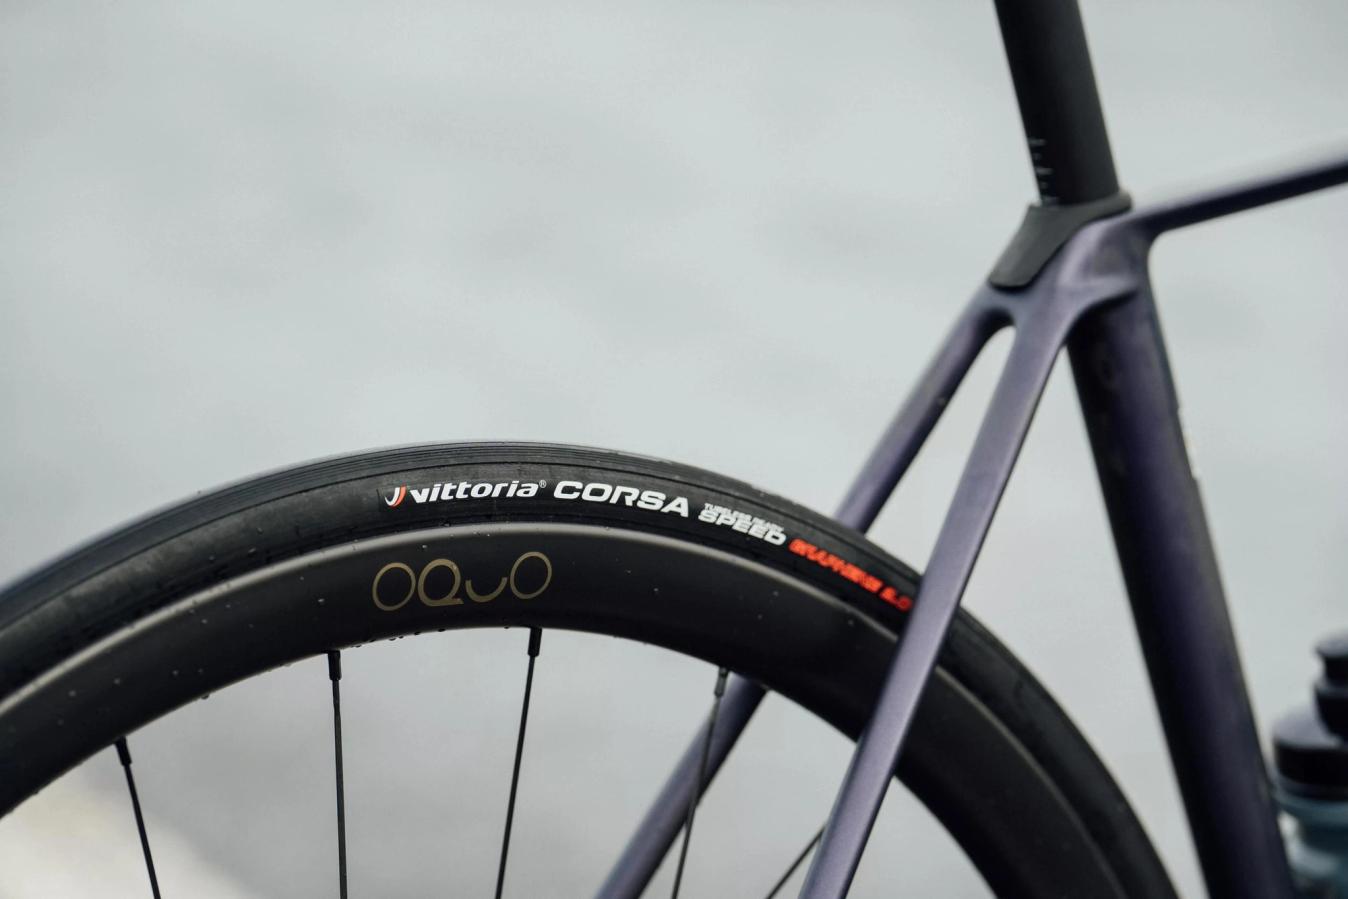 Oquo released their first road wheels in June.